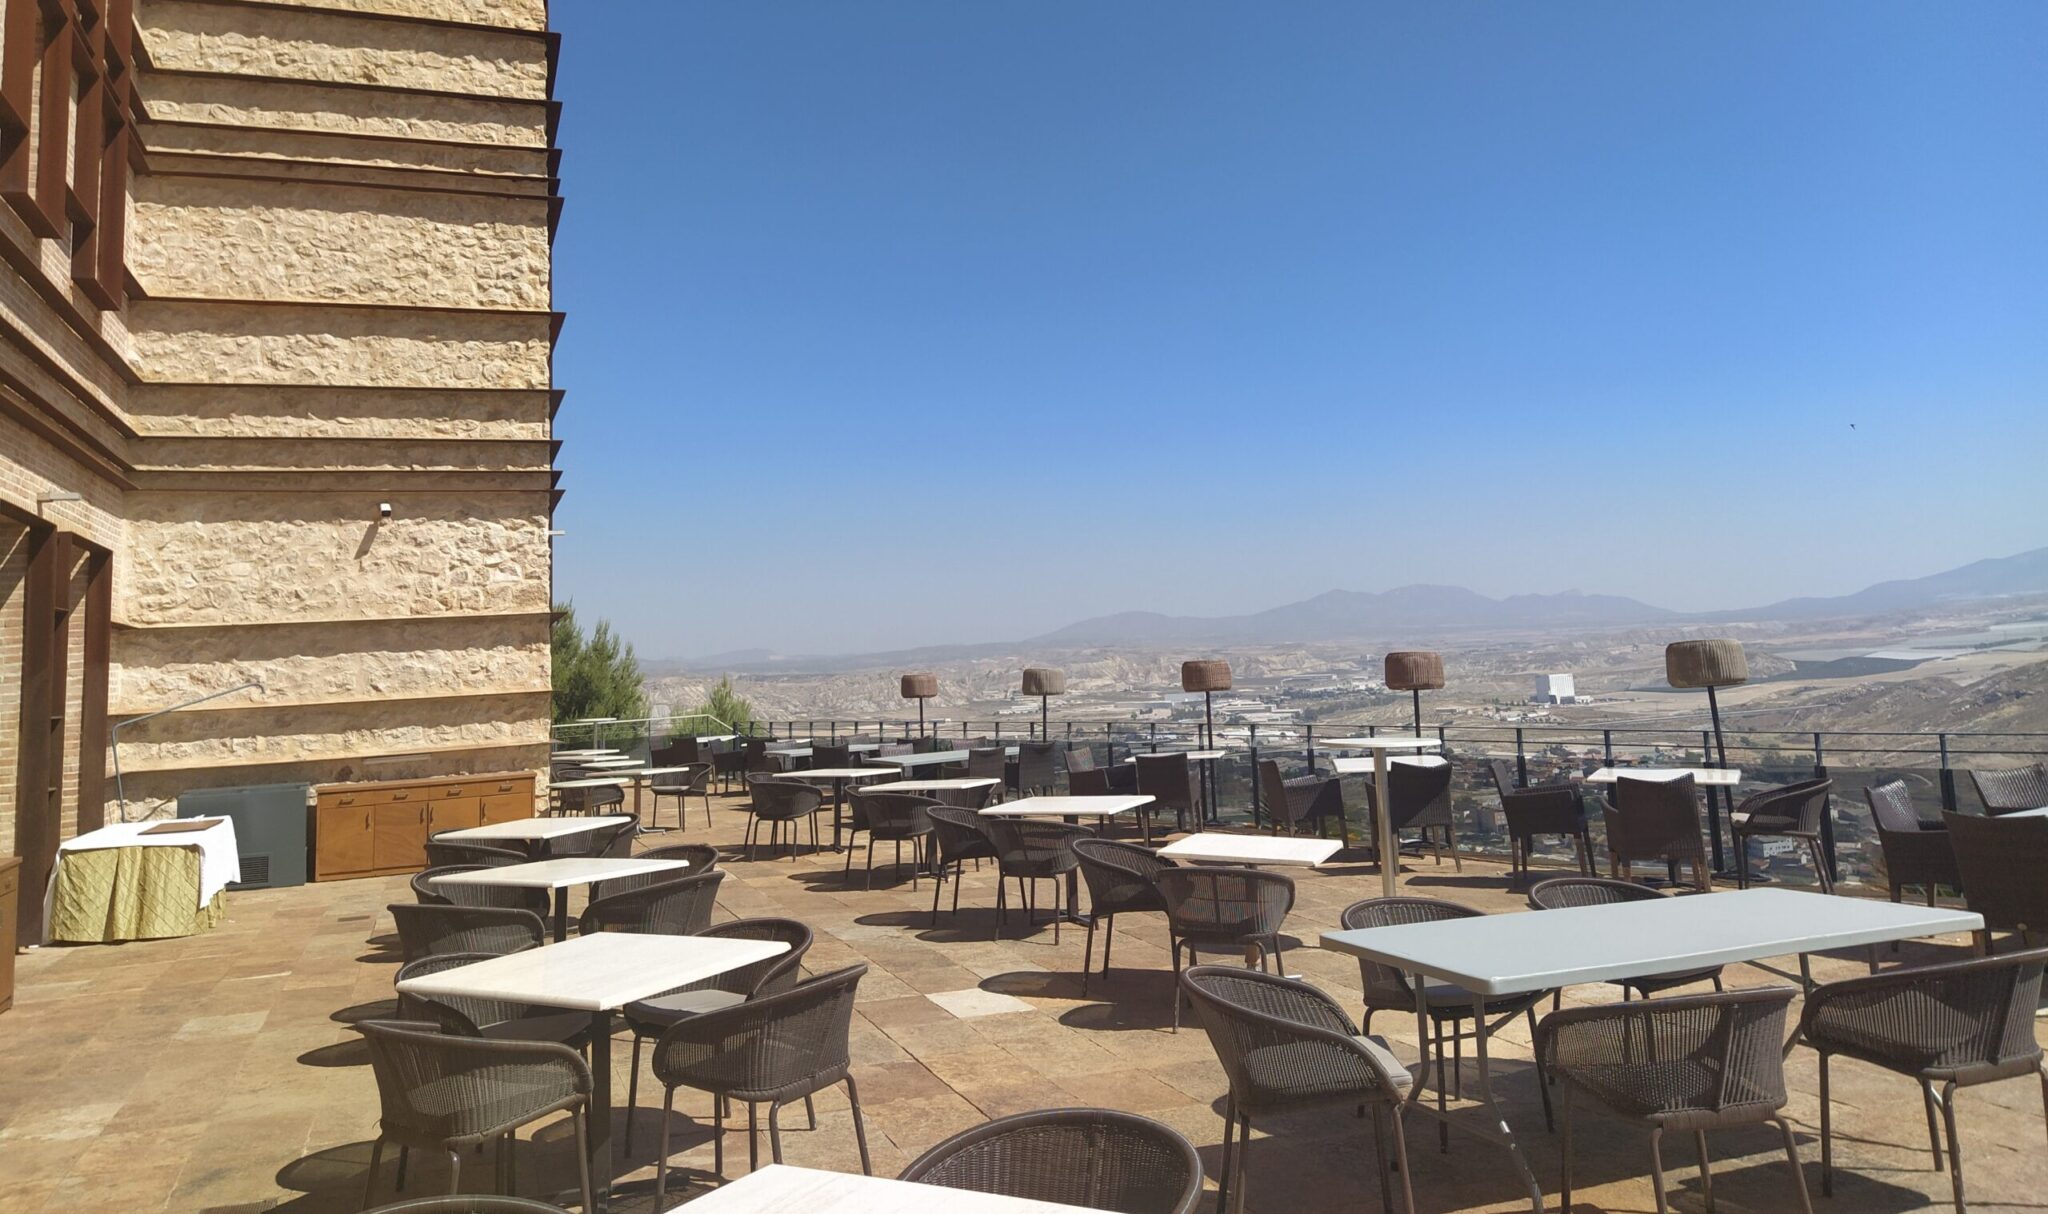 Breathtaking views from the dining terrace area of Parador De Lorca Hotel. The view overlooks the rolling hills & town of Lorca below.